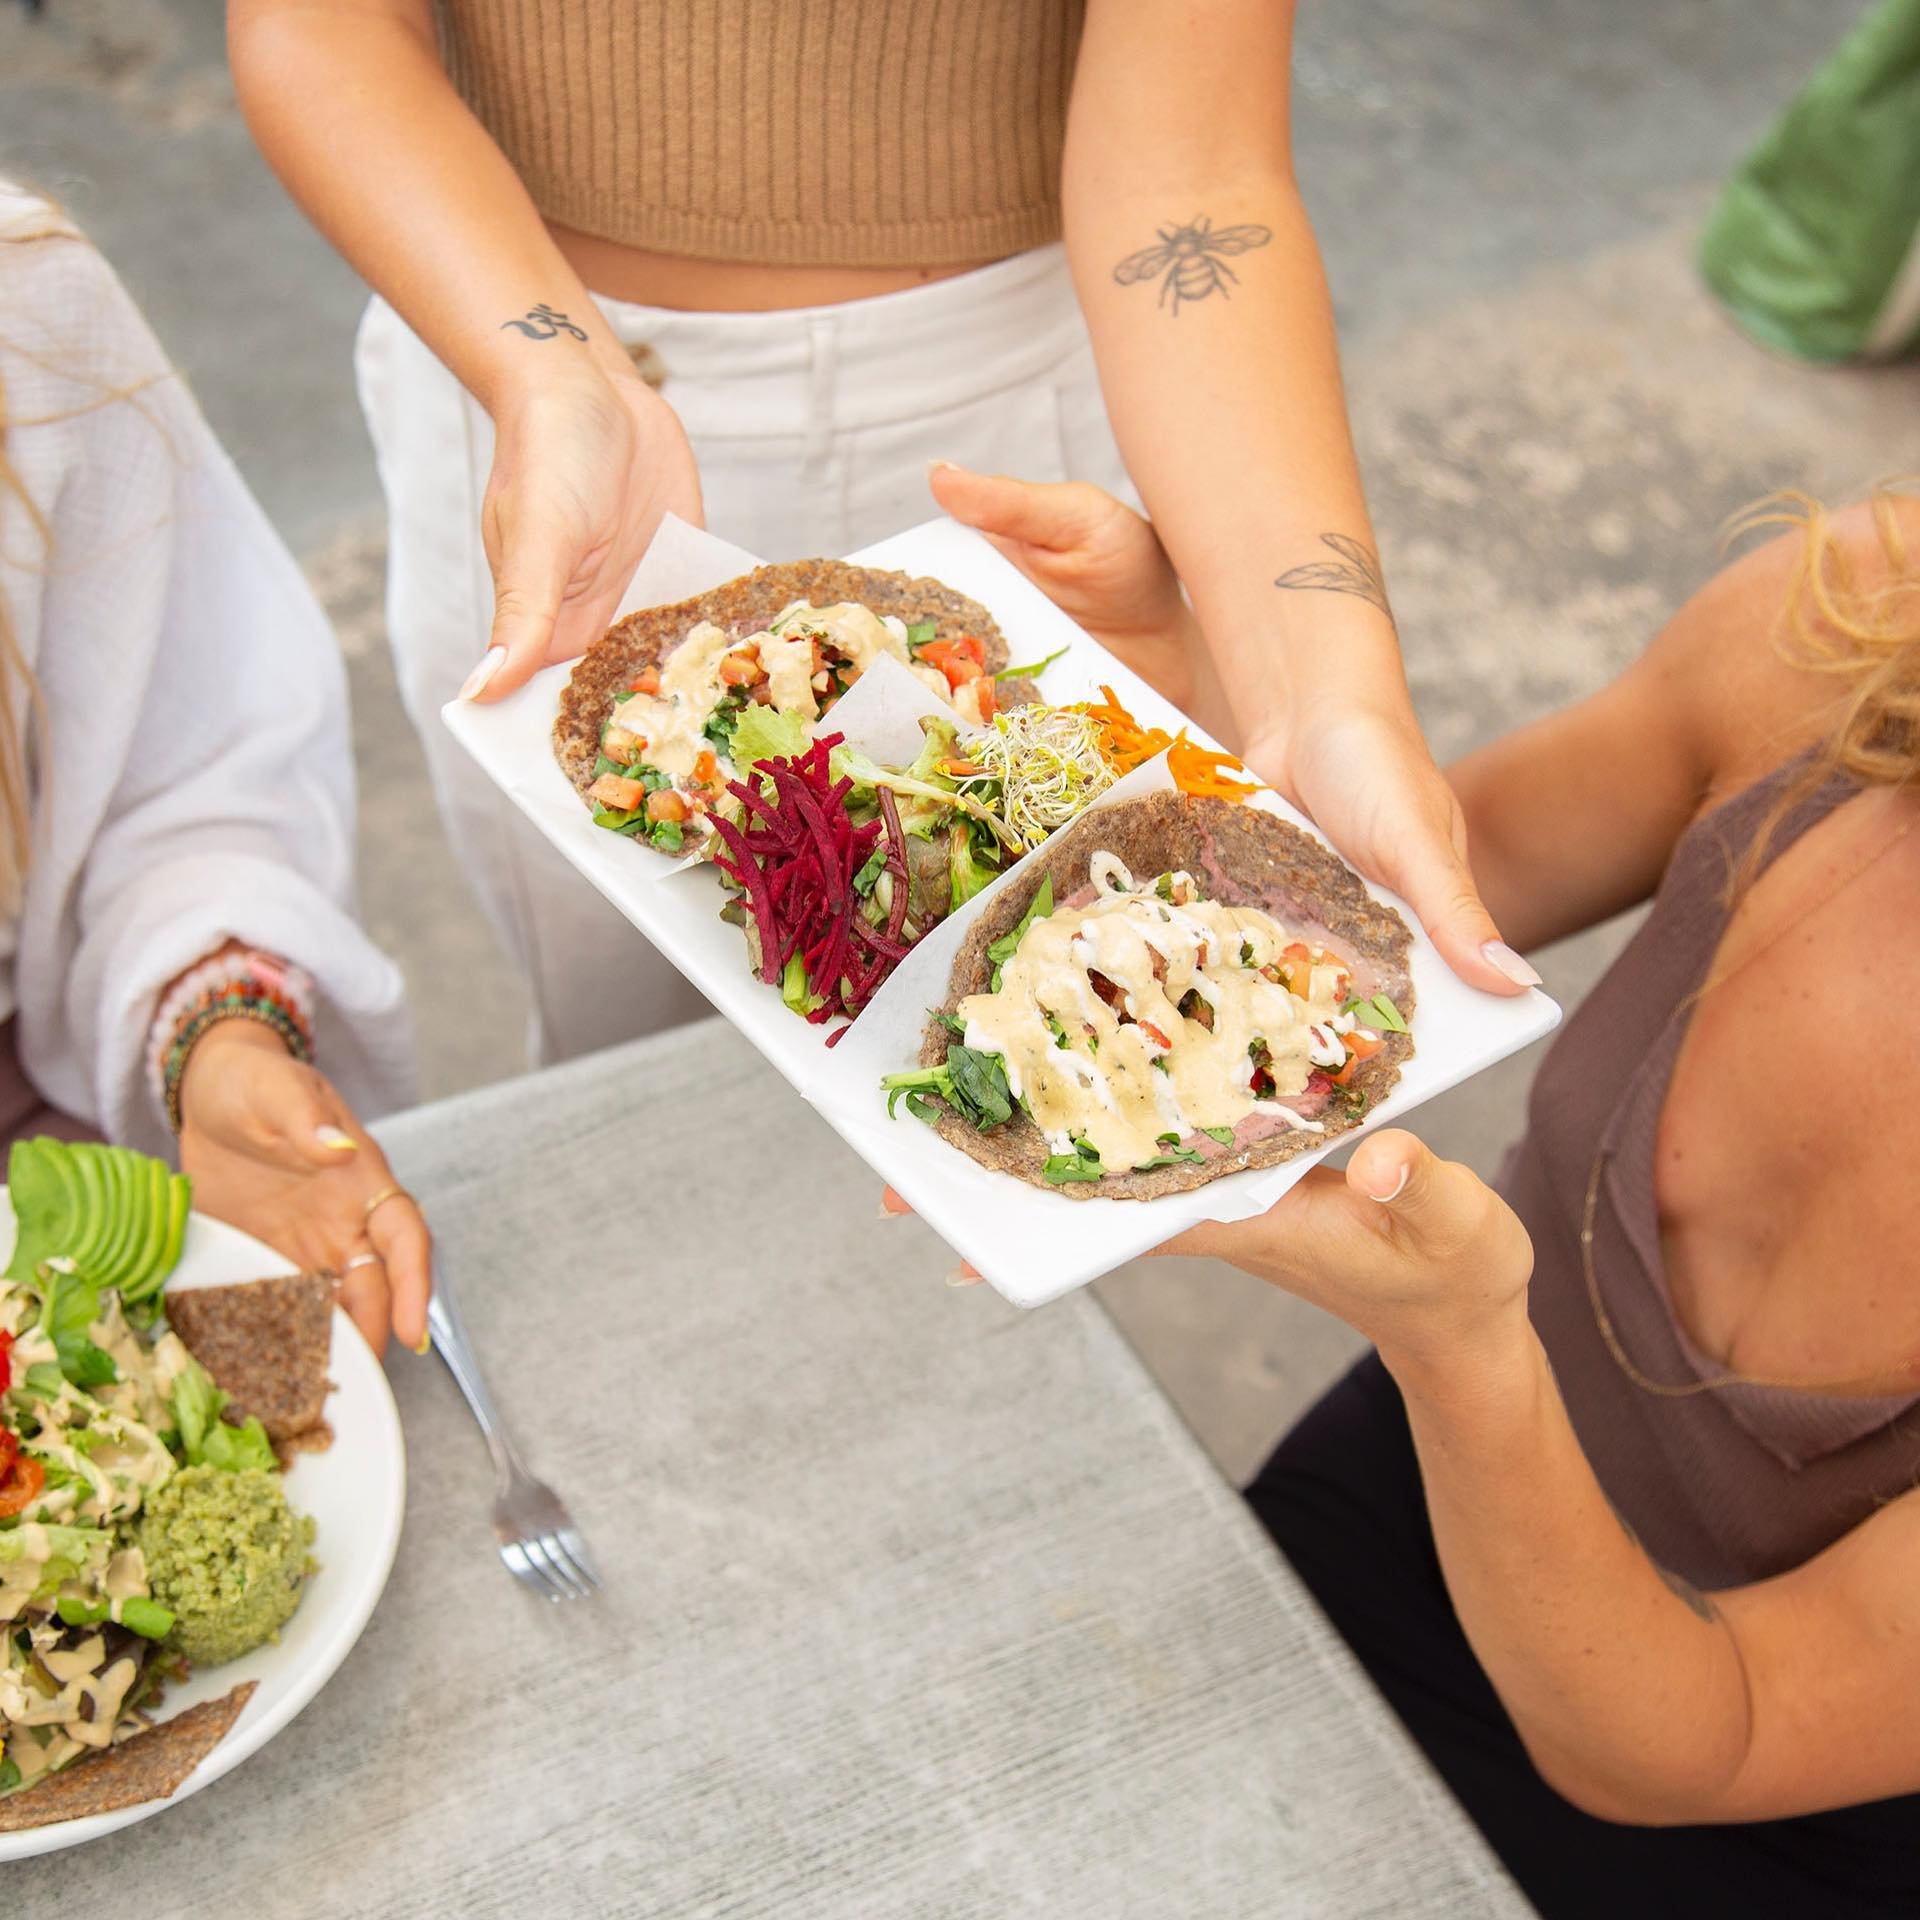 Our high vibrational cafe serves up organic, vegan, gluten-free delights that will tantalize your taste buds and nourish your soul. From mouthwatering tacos to colorful salads to hearty grain bowls, every bite is a celebration of health and happiness